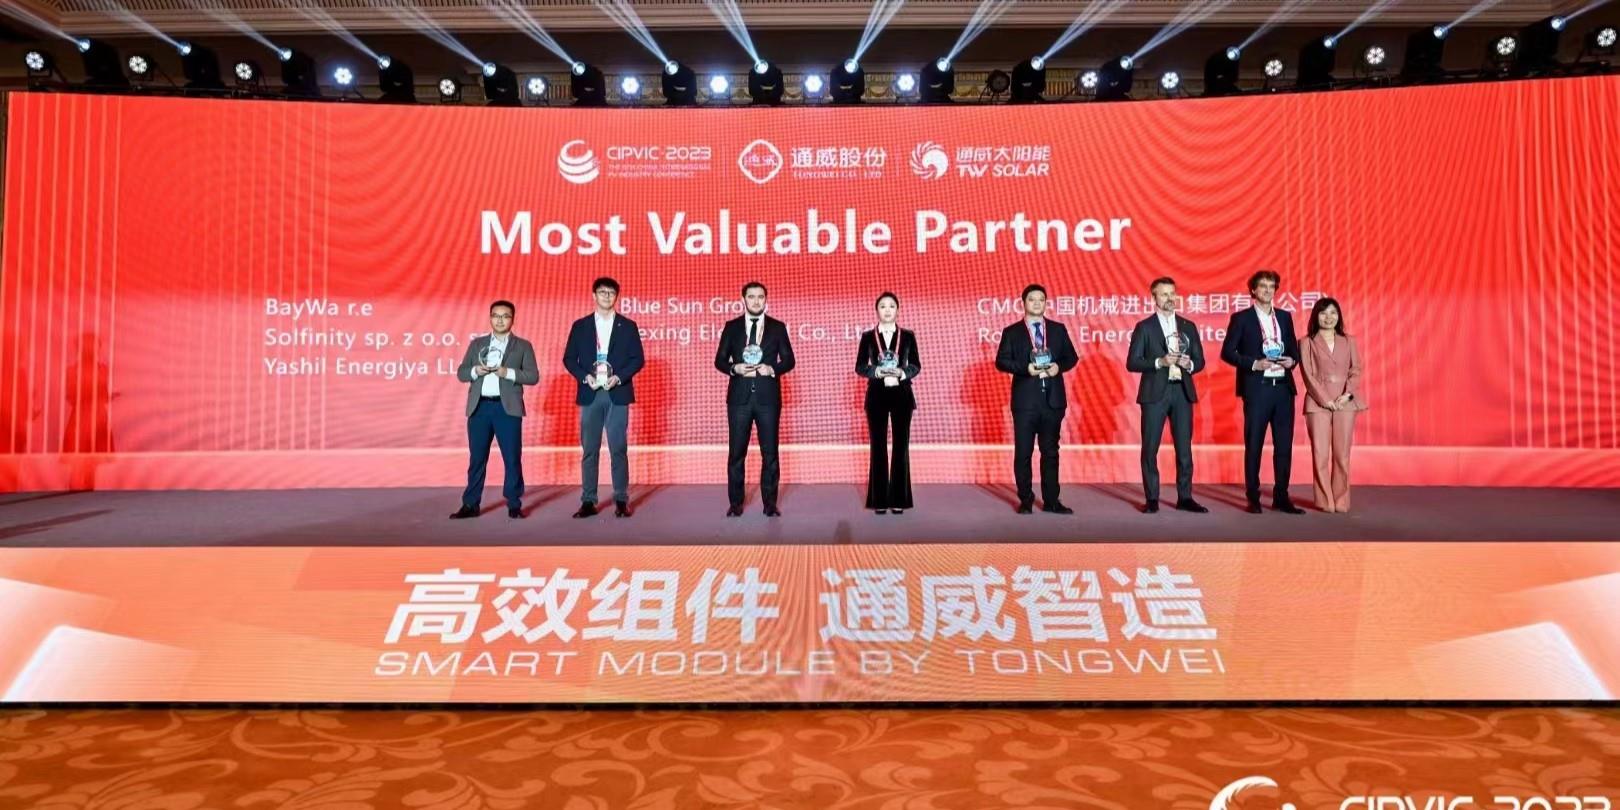 Awarded by TW Solar as "Most Valuable Partner"